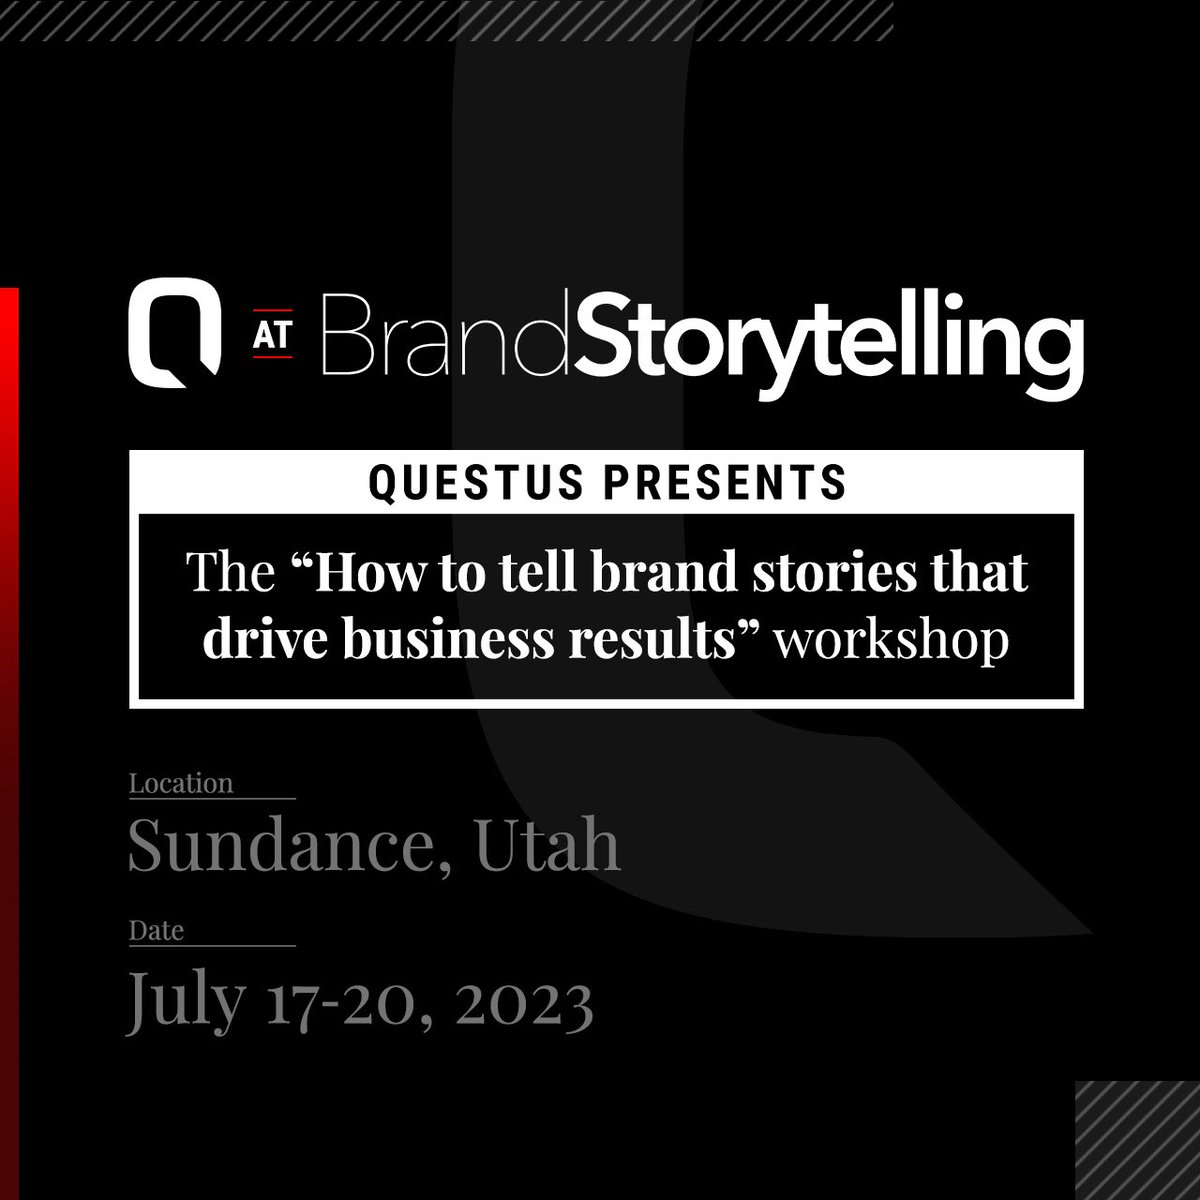 Reporting live from Sundance, Utah! 📍 This week, we're thrilled to be a part of the amazing @brandstorytv  event. Join us as we lead an engaging workshop on crafting powerful brand narratives that deliver real business impact. 💼 #marketingdigital #brandstrategy #businessgrowth